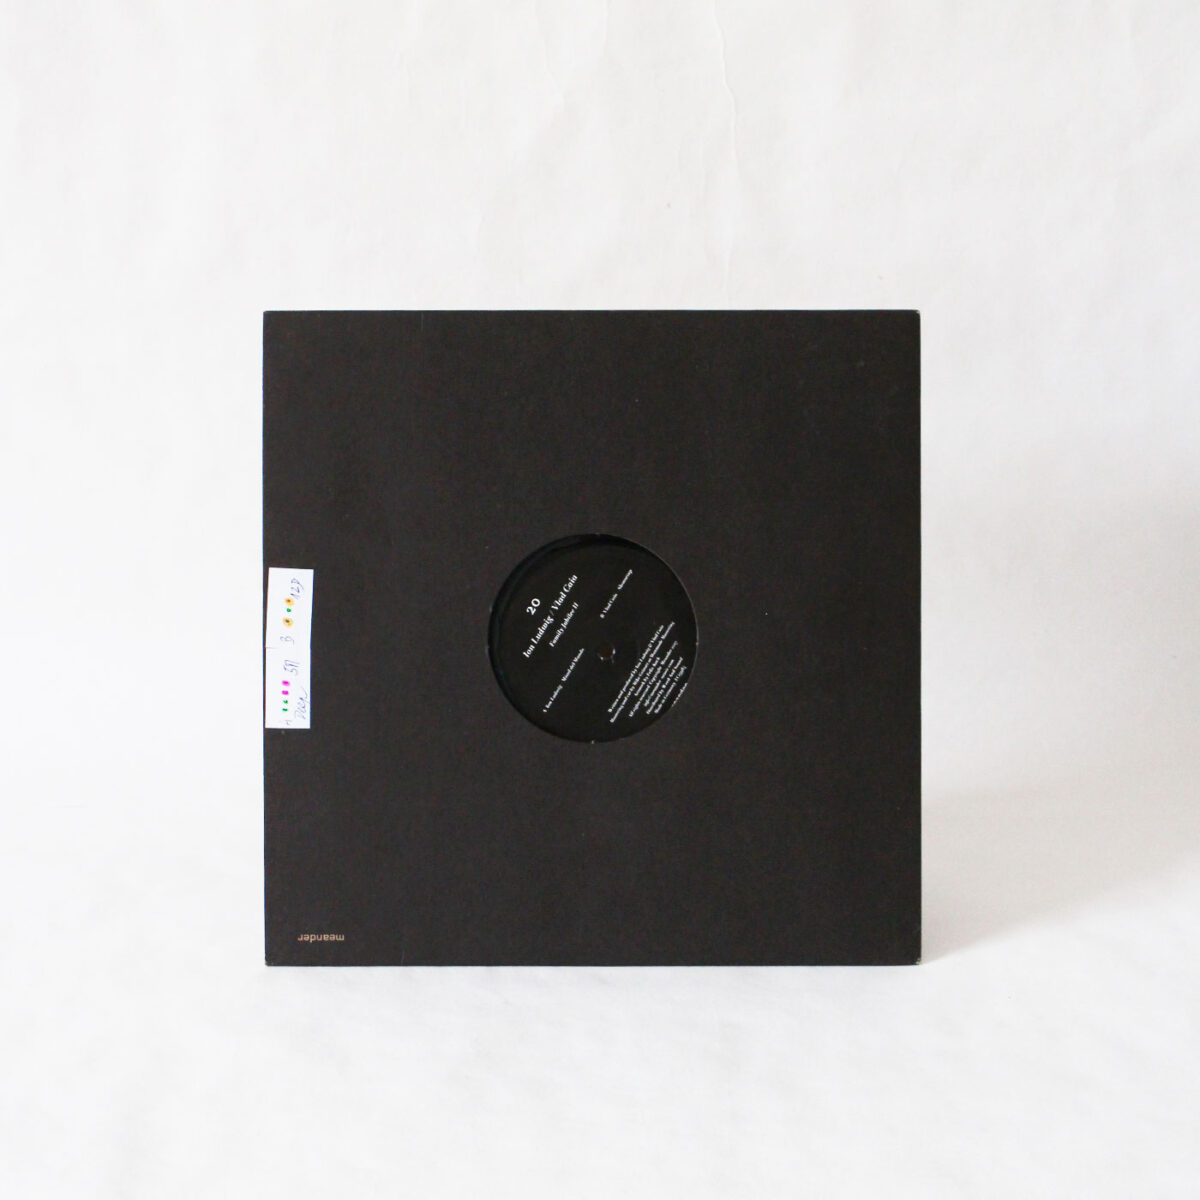 Ion Ludwig Vlad Caia - Family Jubilee II (Vinyl Second Hand) Minimal Techno House Meander – MEANDER 20.1